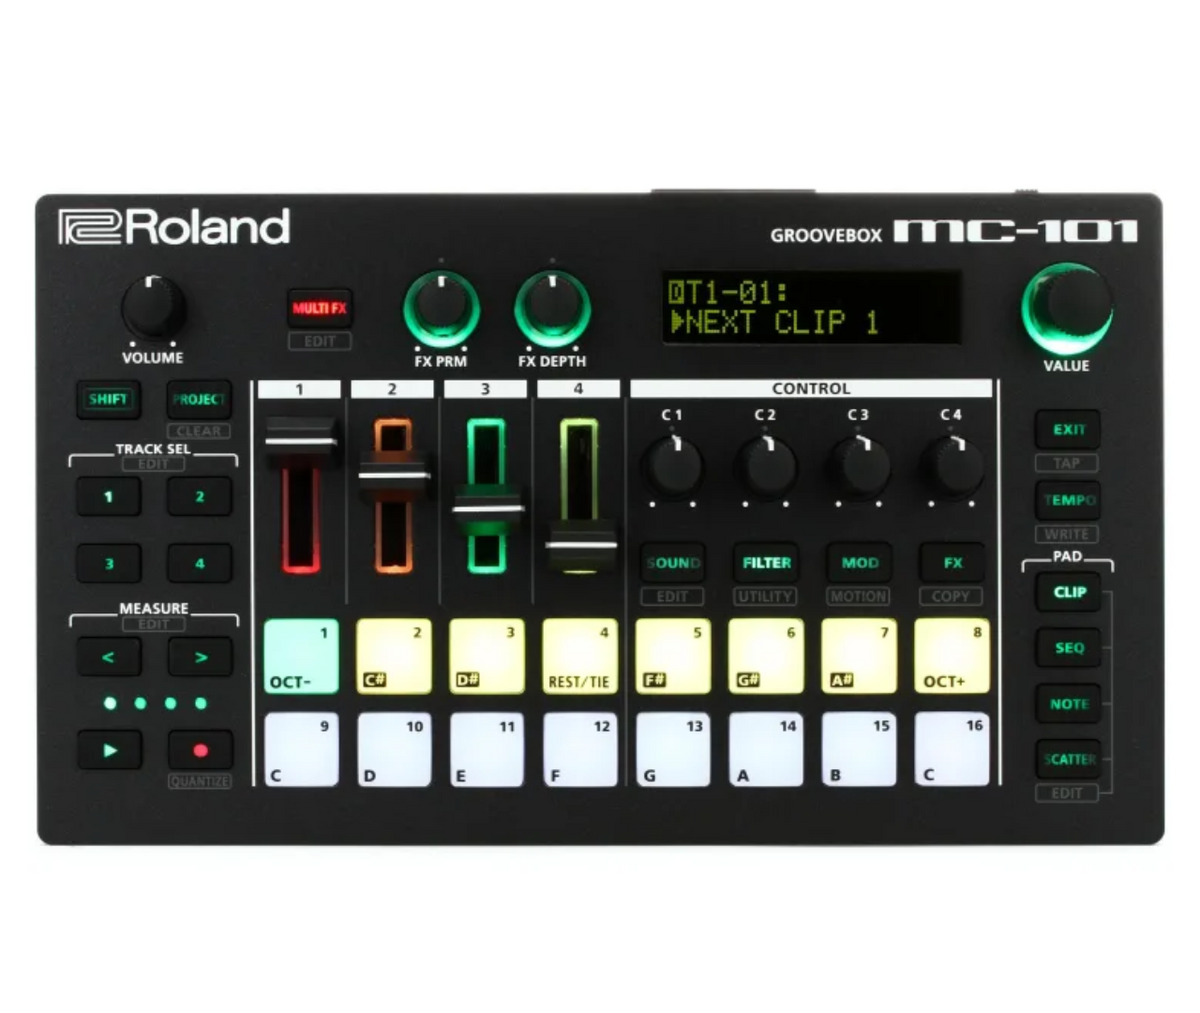 Roland MC-101 GROOVEBOX Audio Effects Synthesizer Portable Studio with 4-track Sequencer for Electronic and Dance-focused Music